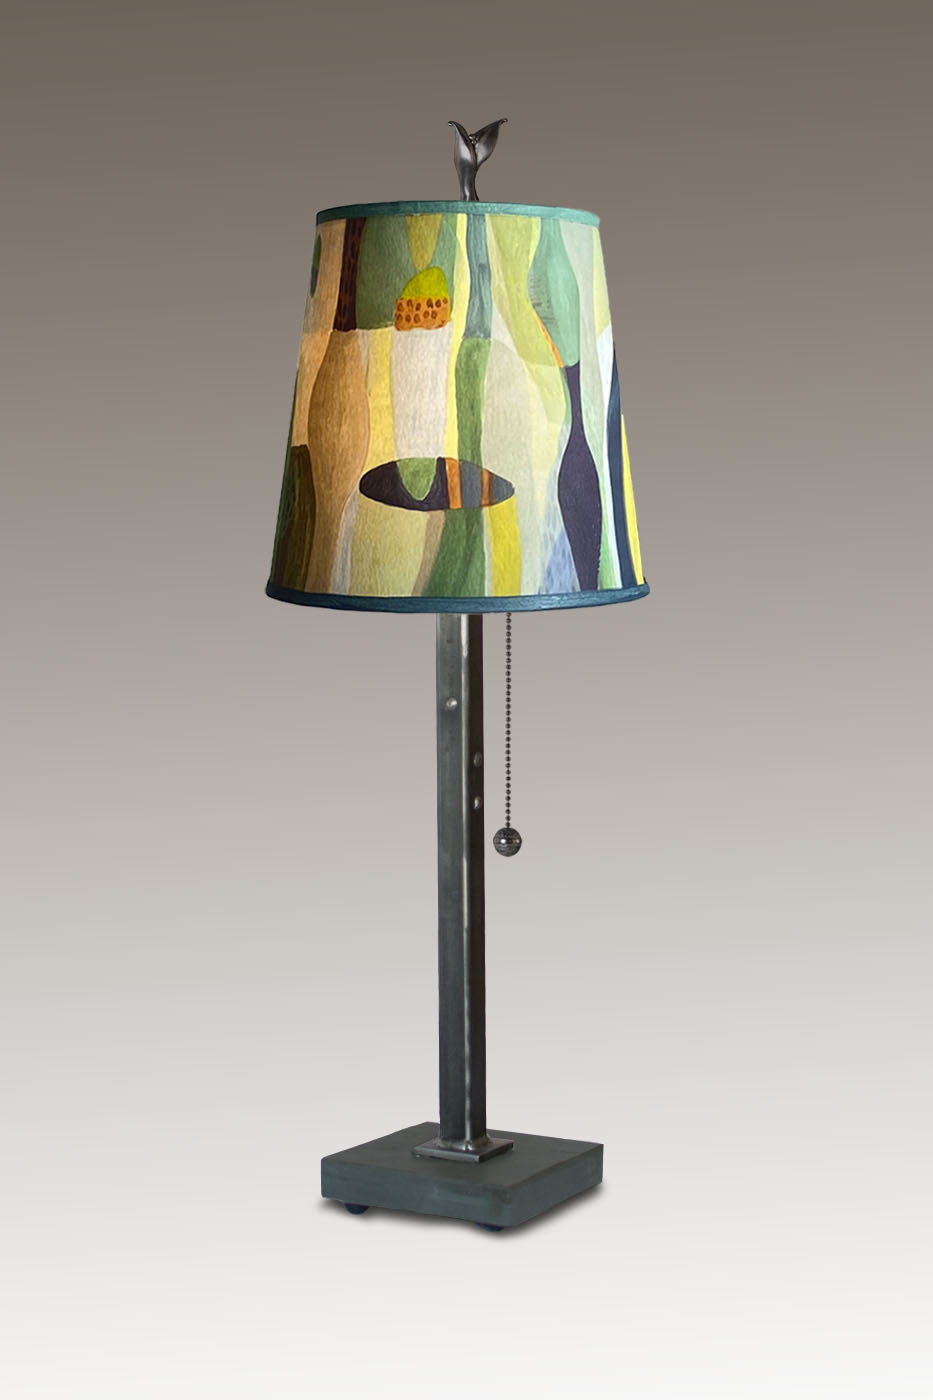 Janna Ugone & Co Table Lamp Steel Table Lamp with Small Drum Shade in Riviera in Citrus